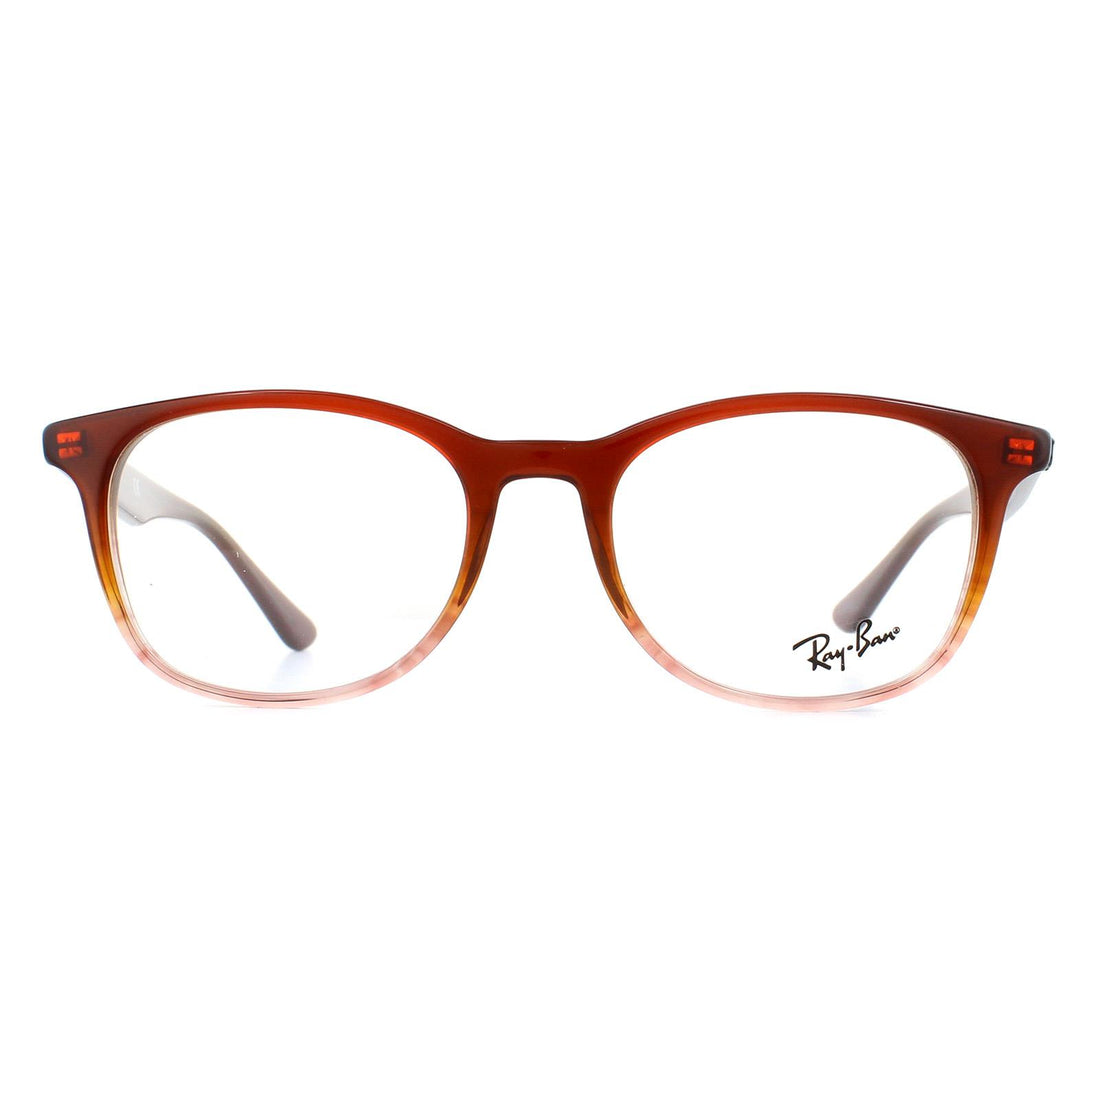 Ray-Ban 5356 Glasses Frames Brown on Stripped Brown